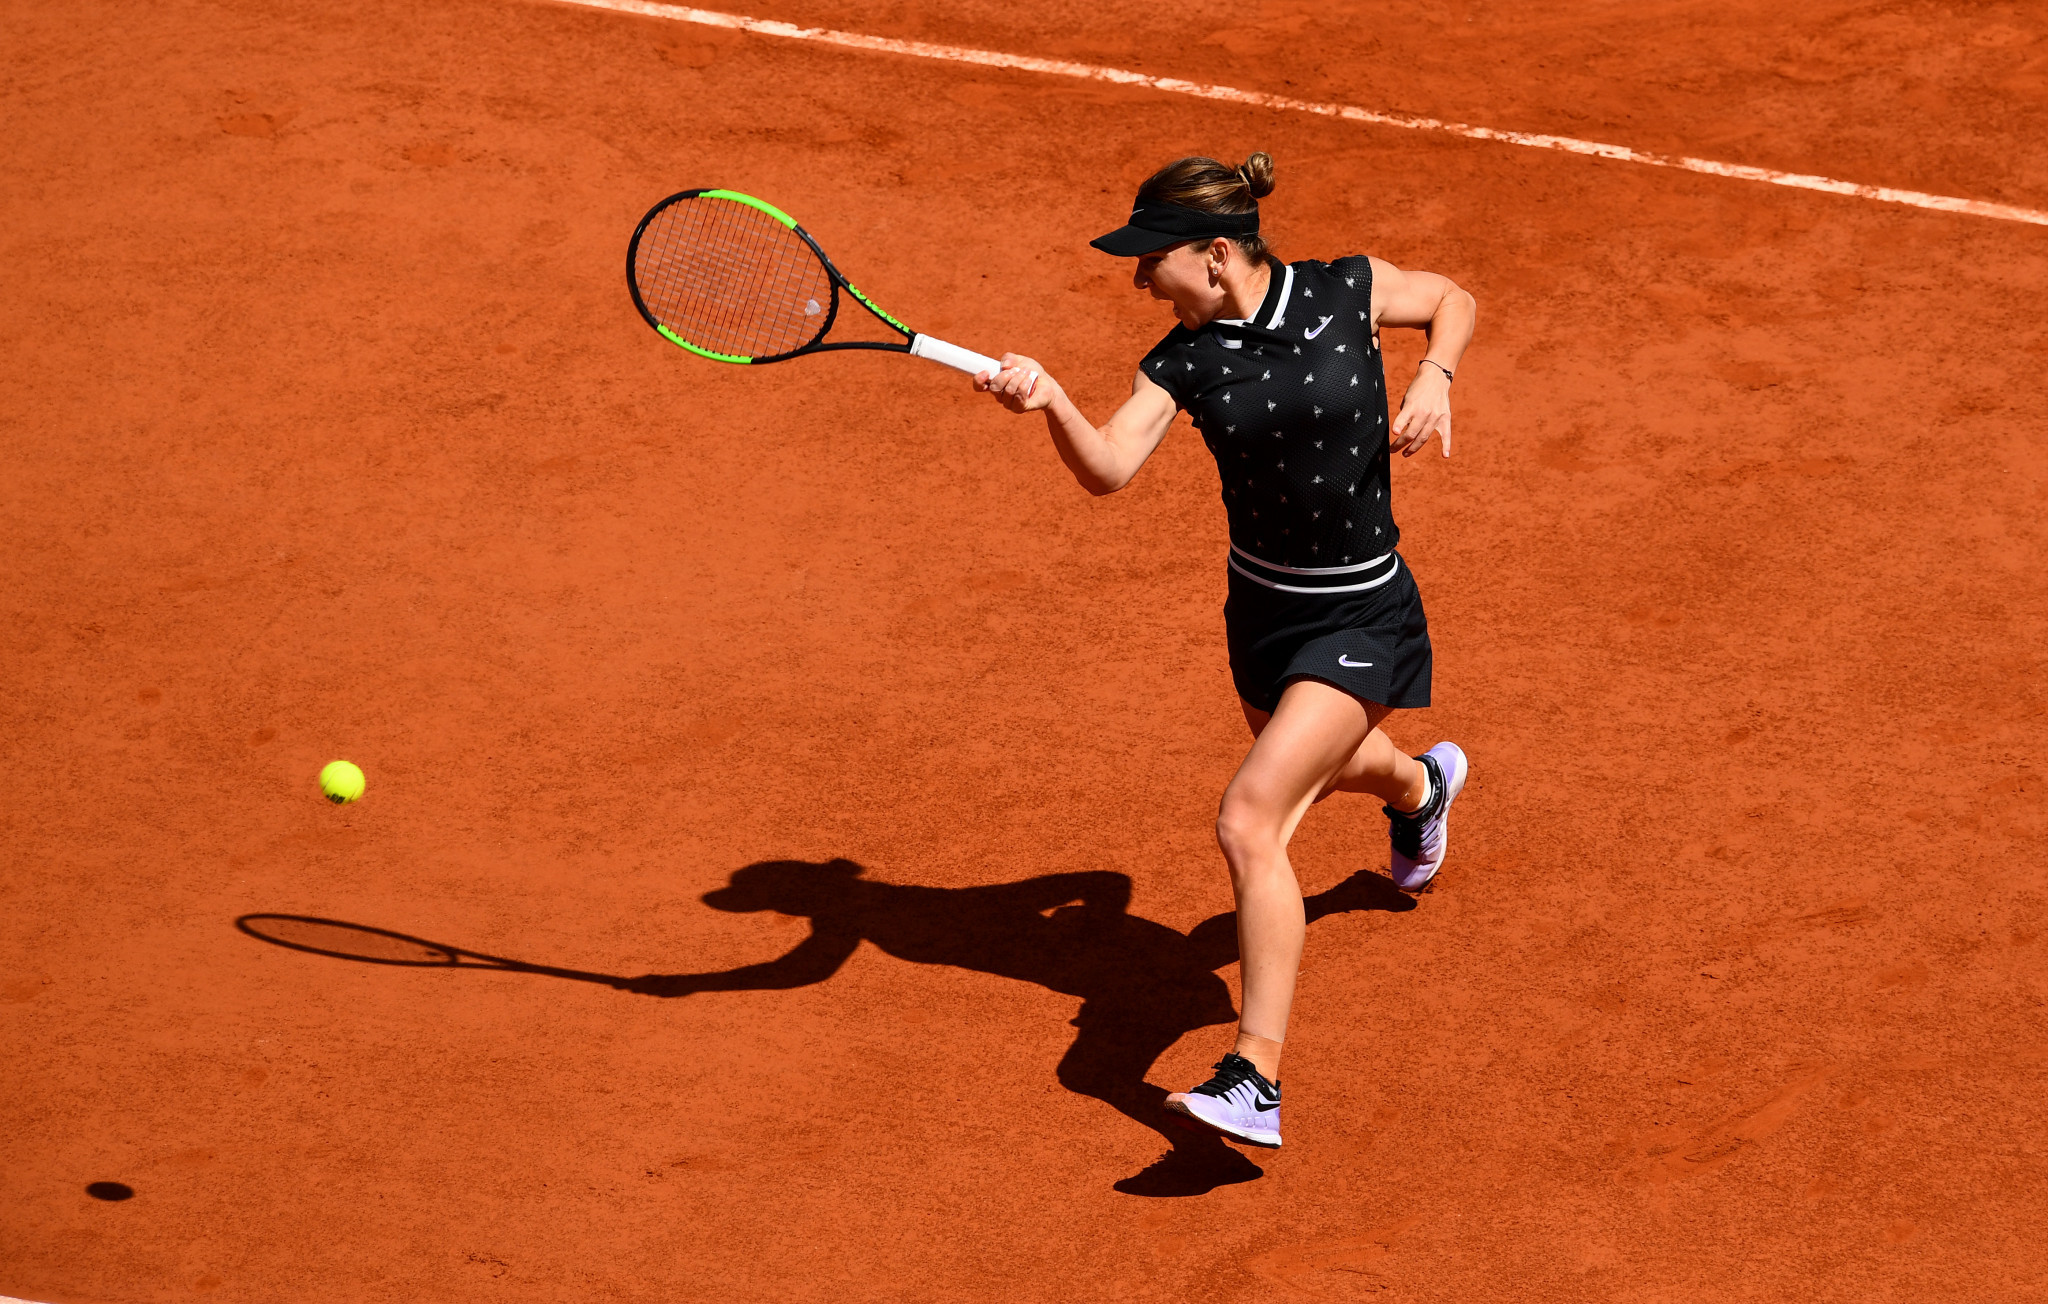 Romanian Simona Halep was bidding to retain her French Open title but could not find her groove against Anisimova ©Getty Images